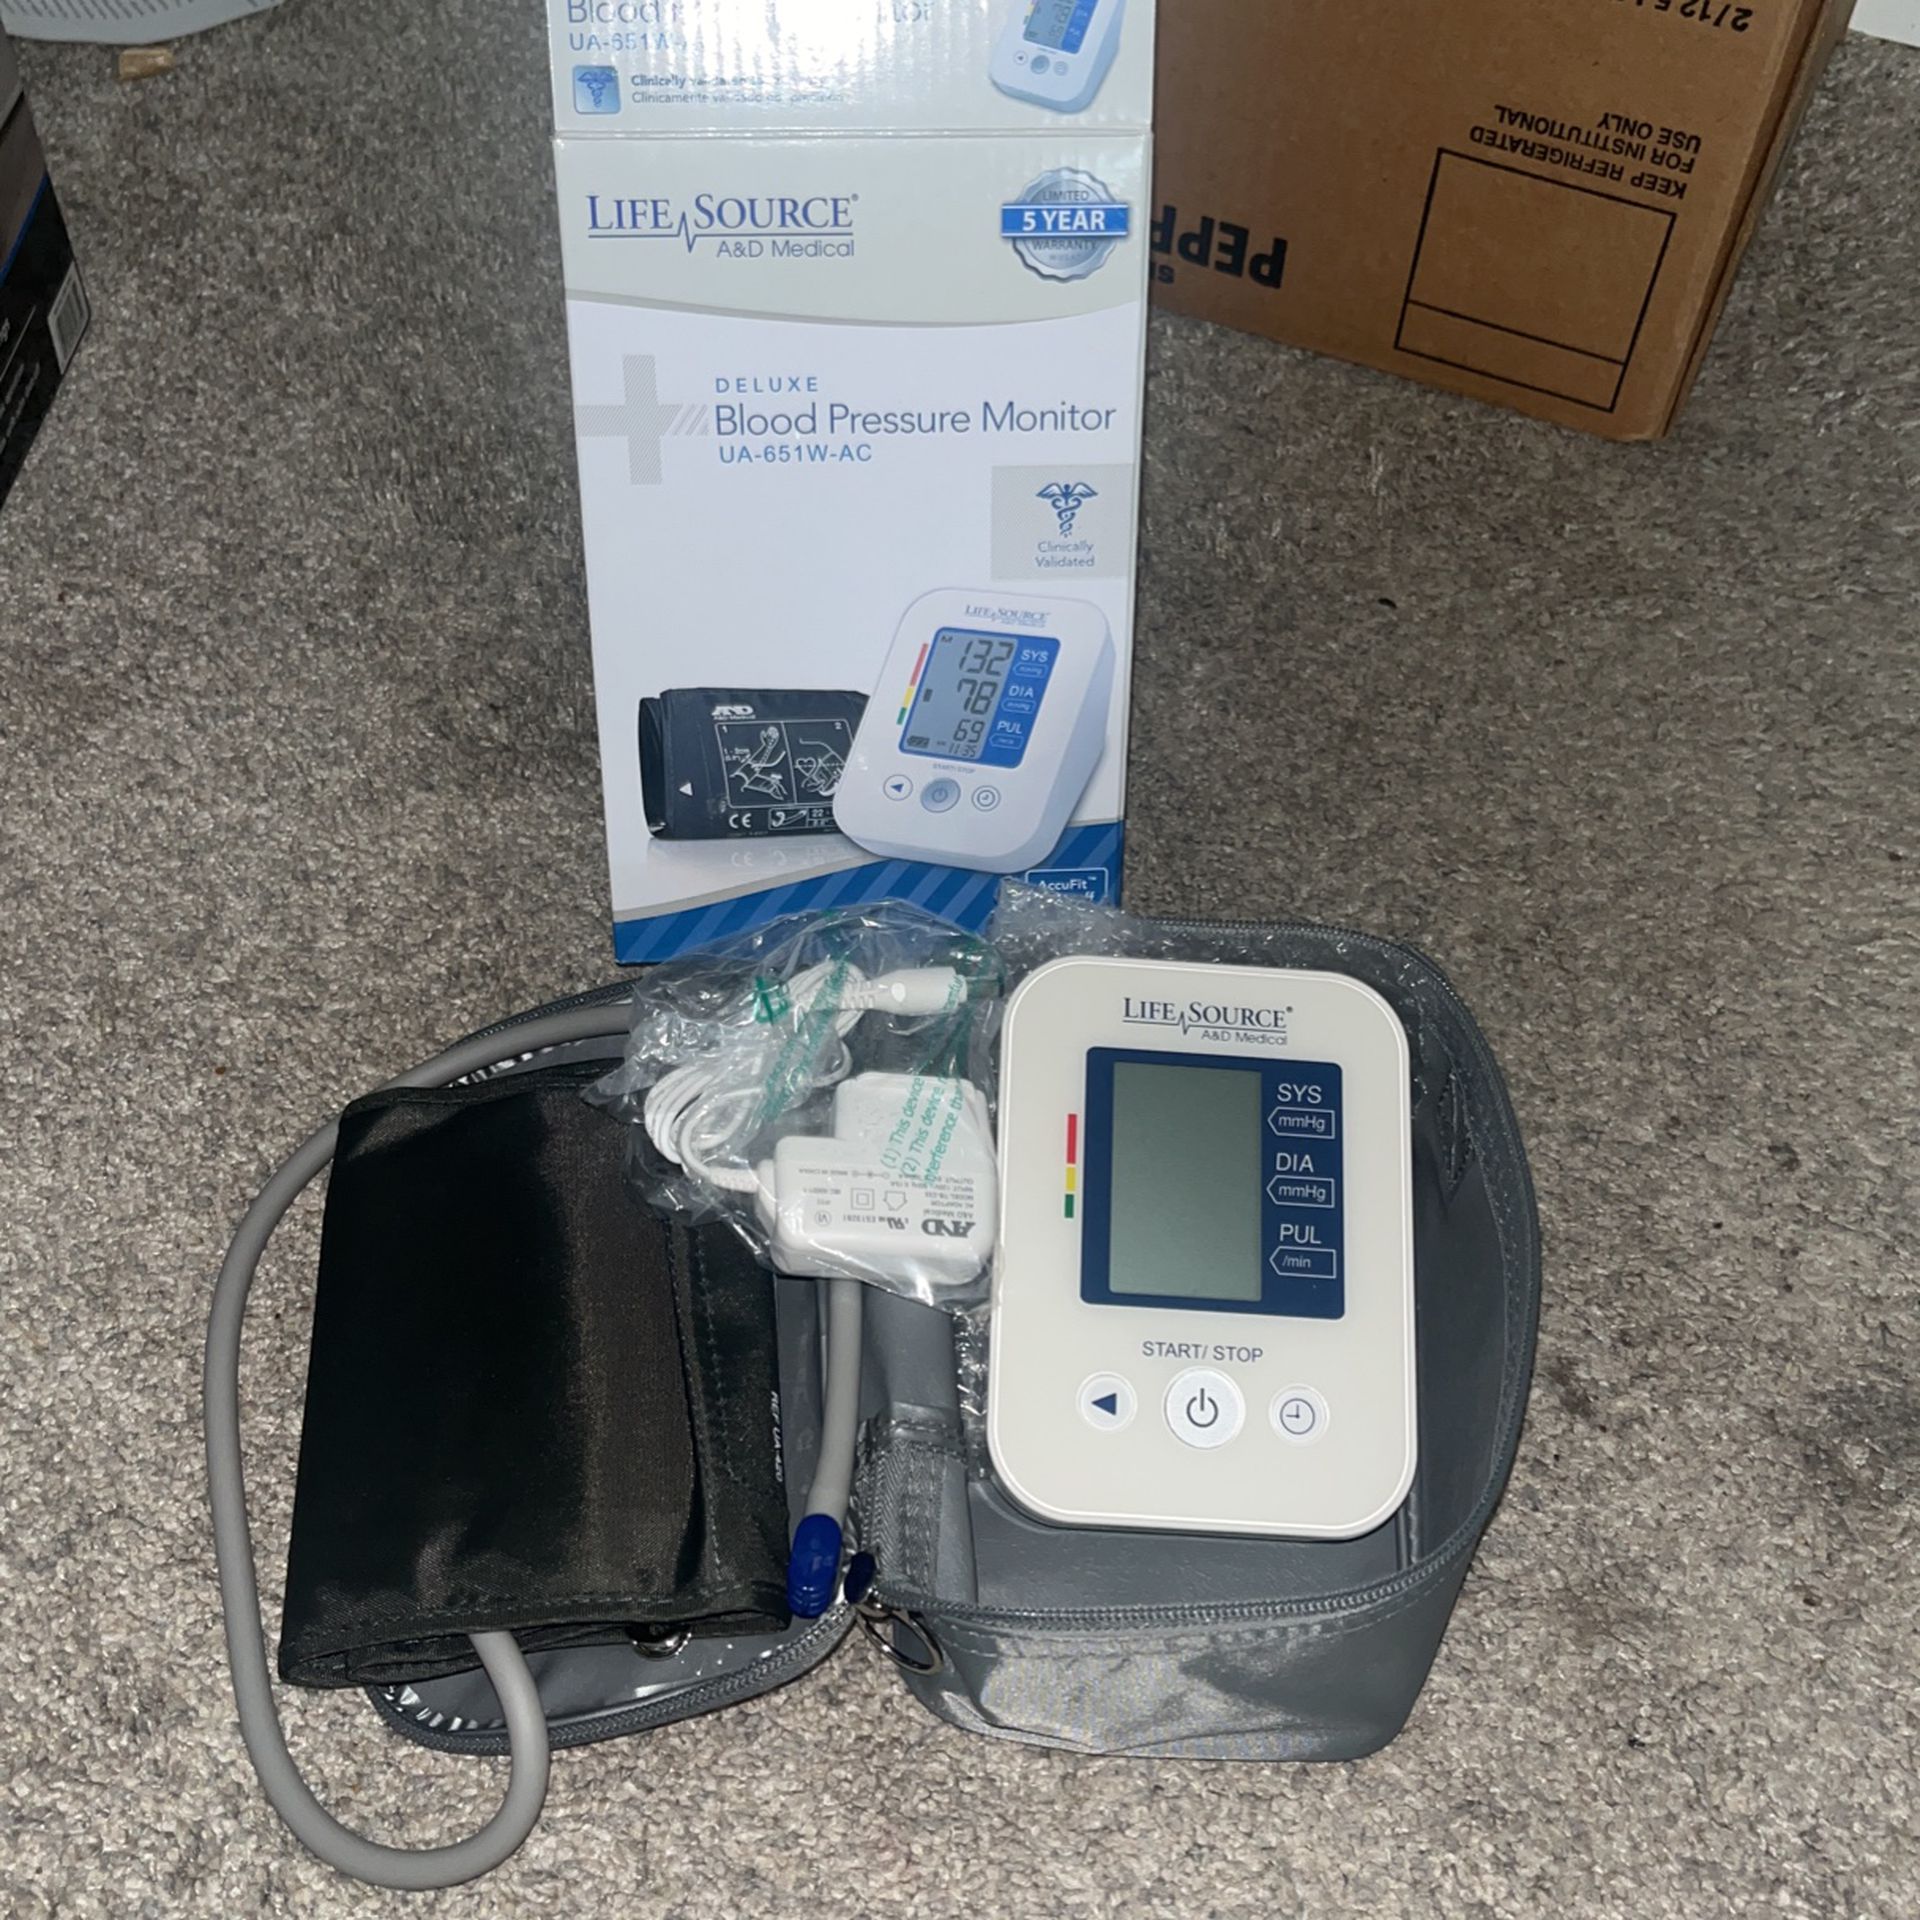 Life Source Deluxe Blood Pressure Monitor